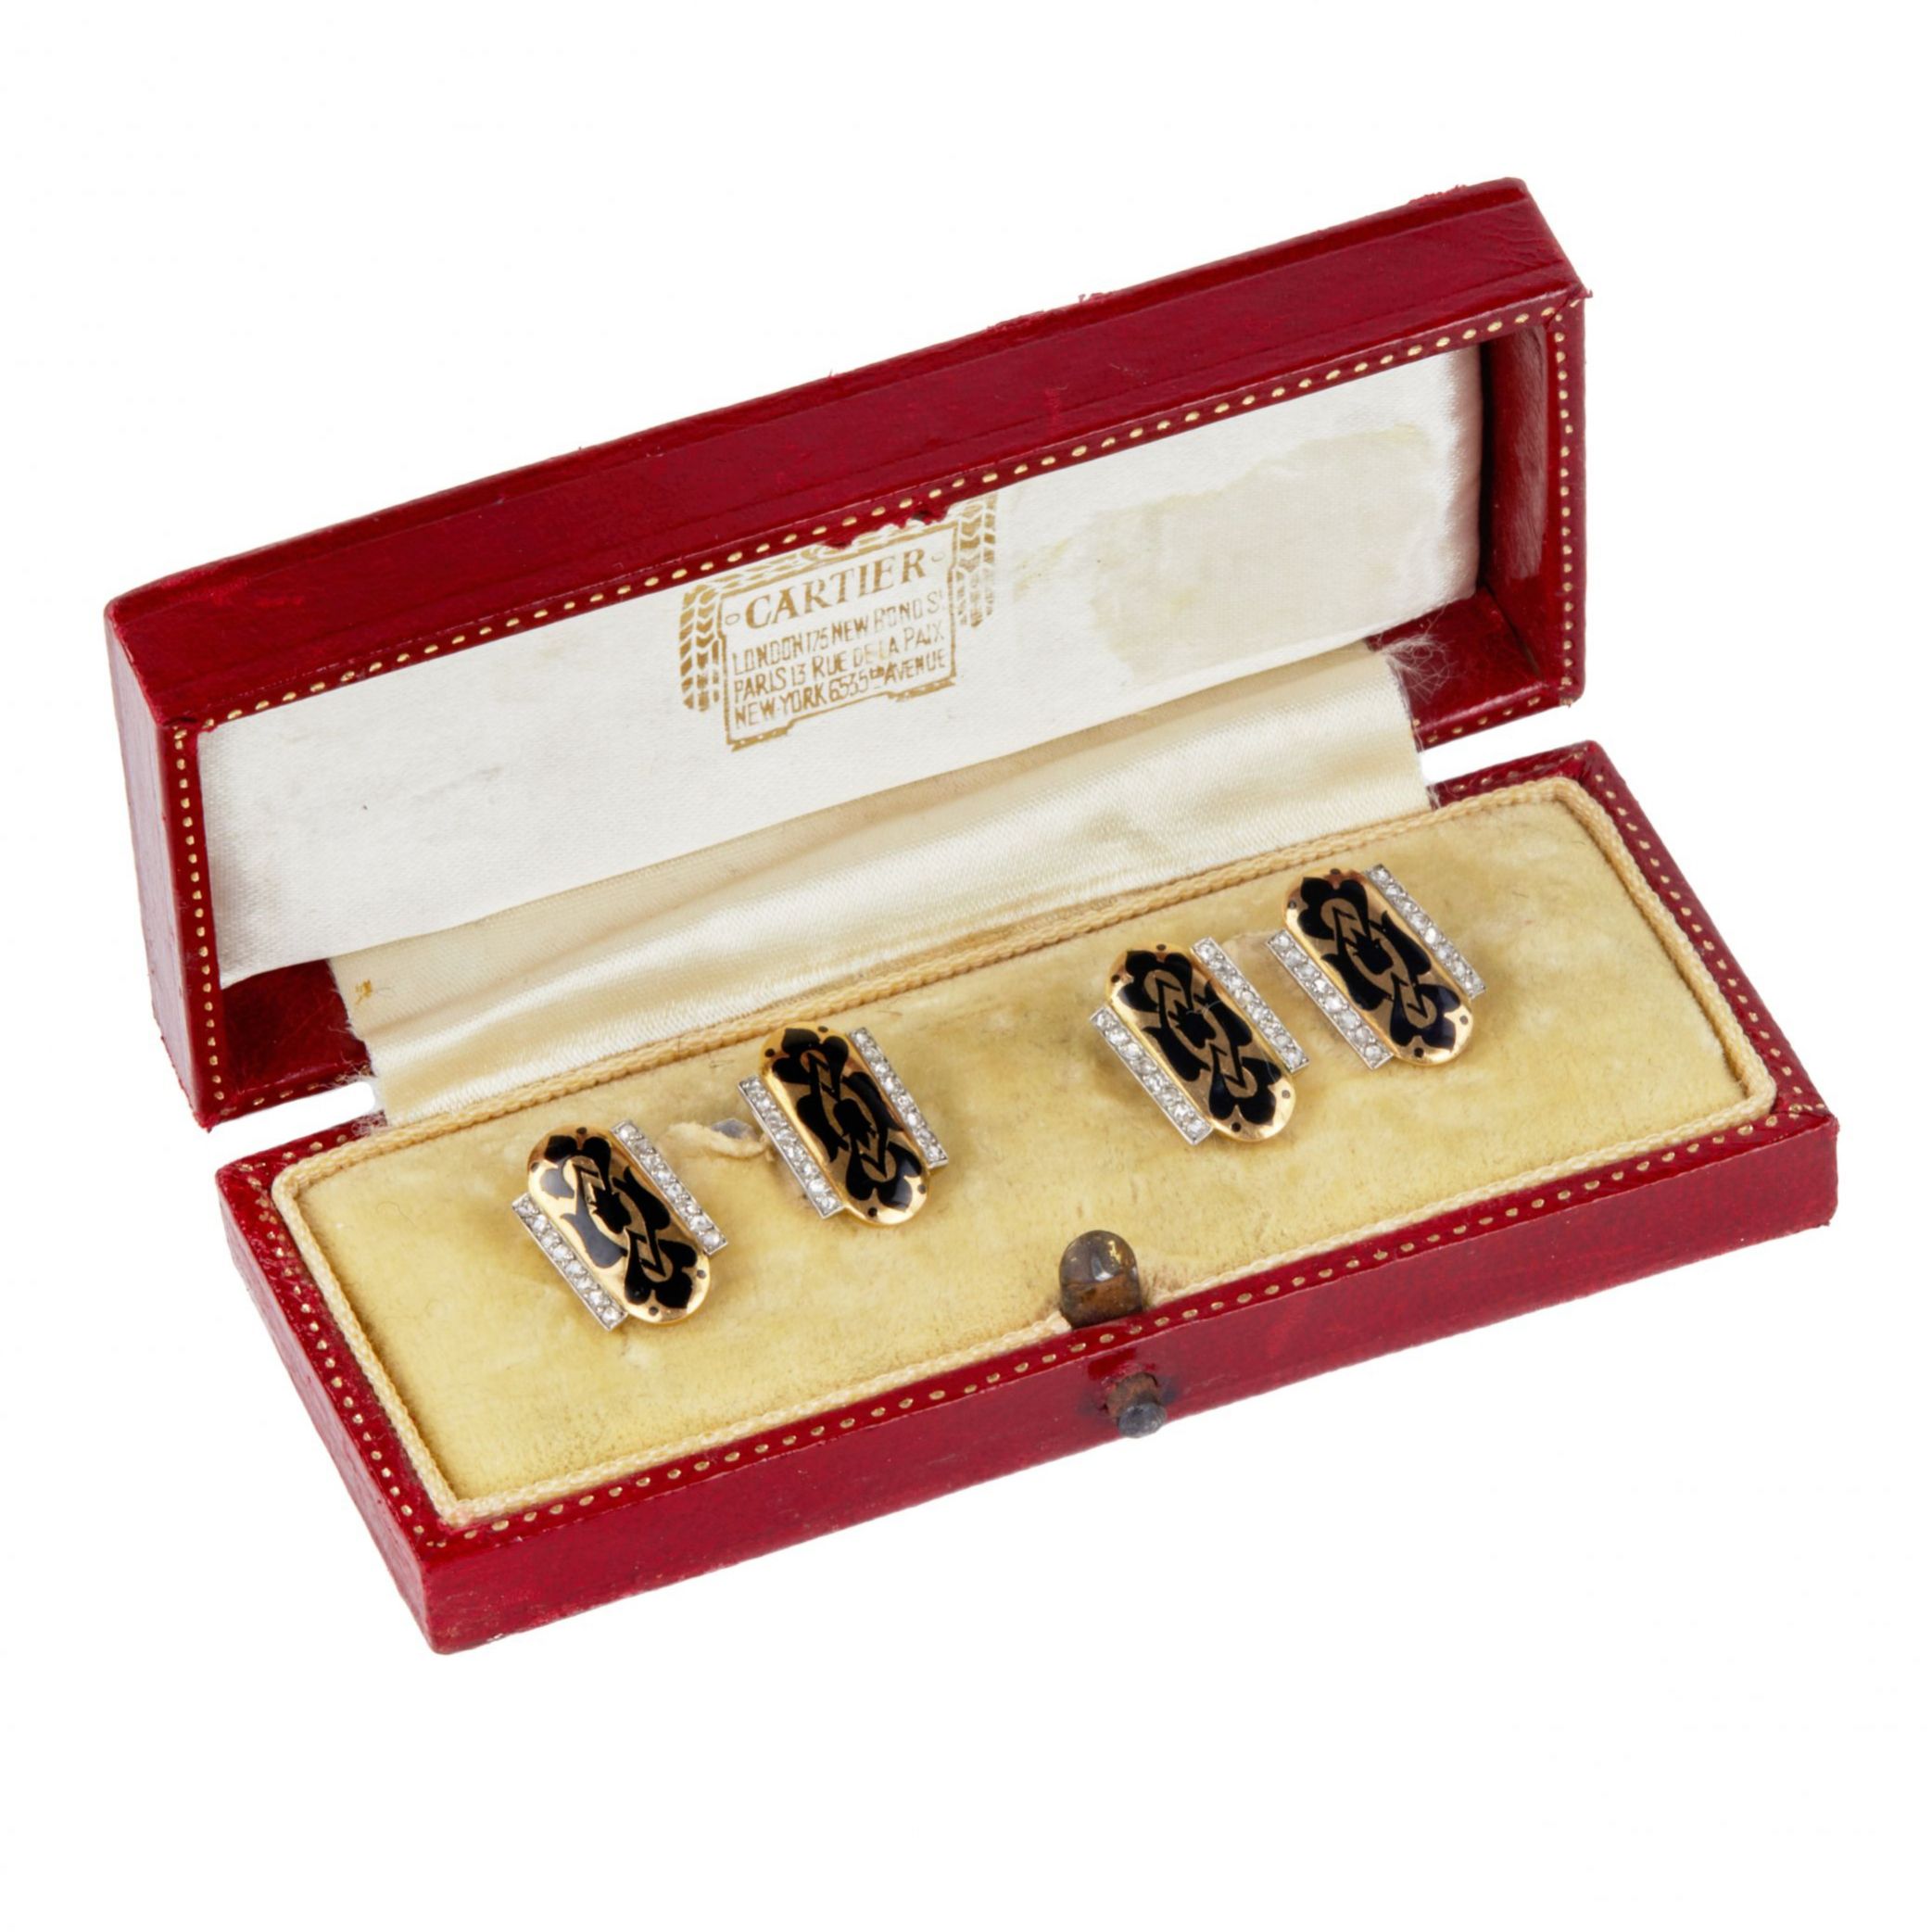 Cartier-gold-cufflinks-with-enamel-and-diamonds-1920s-